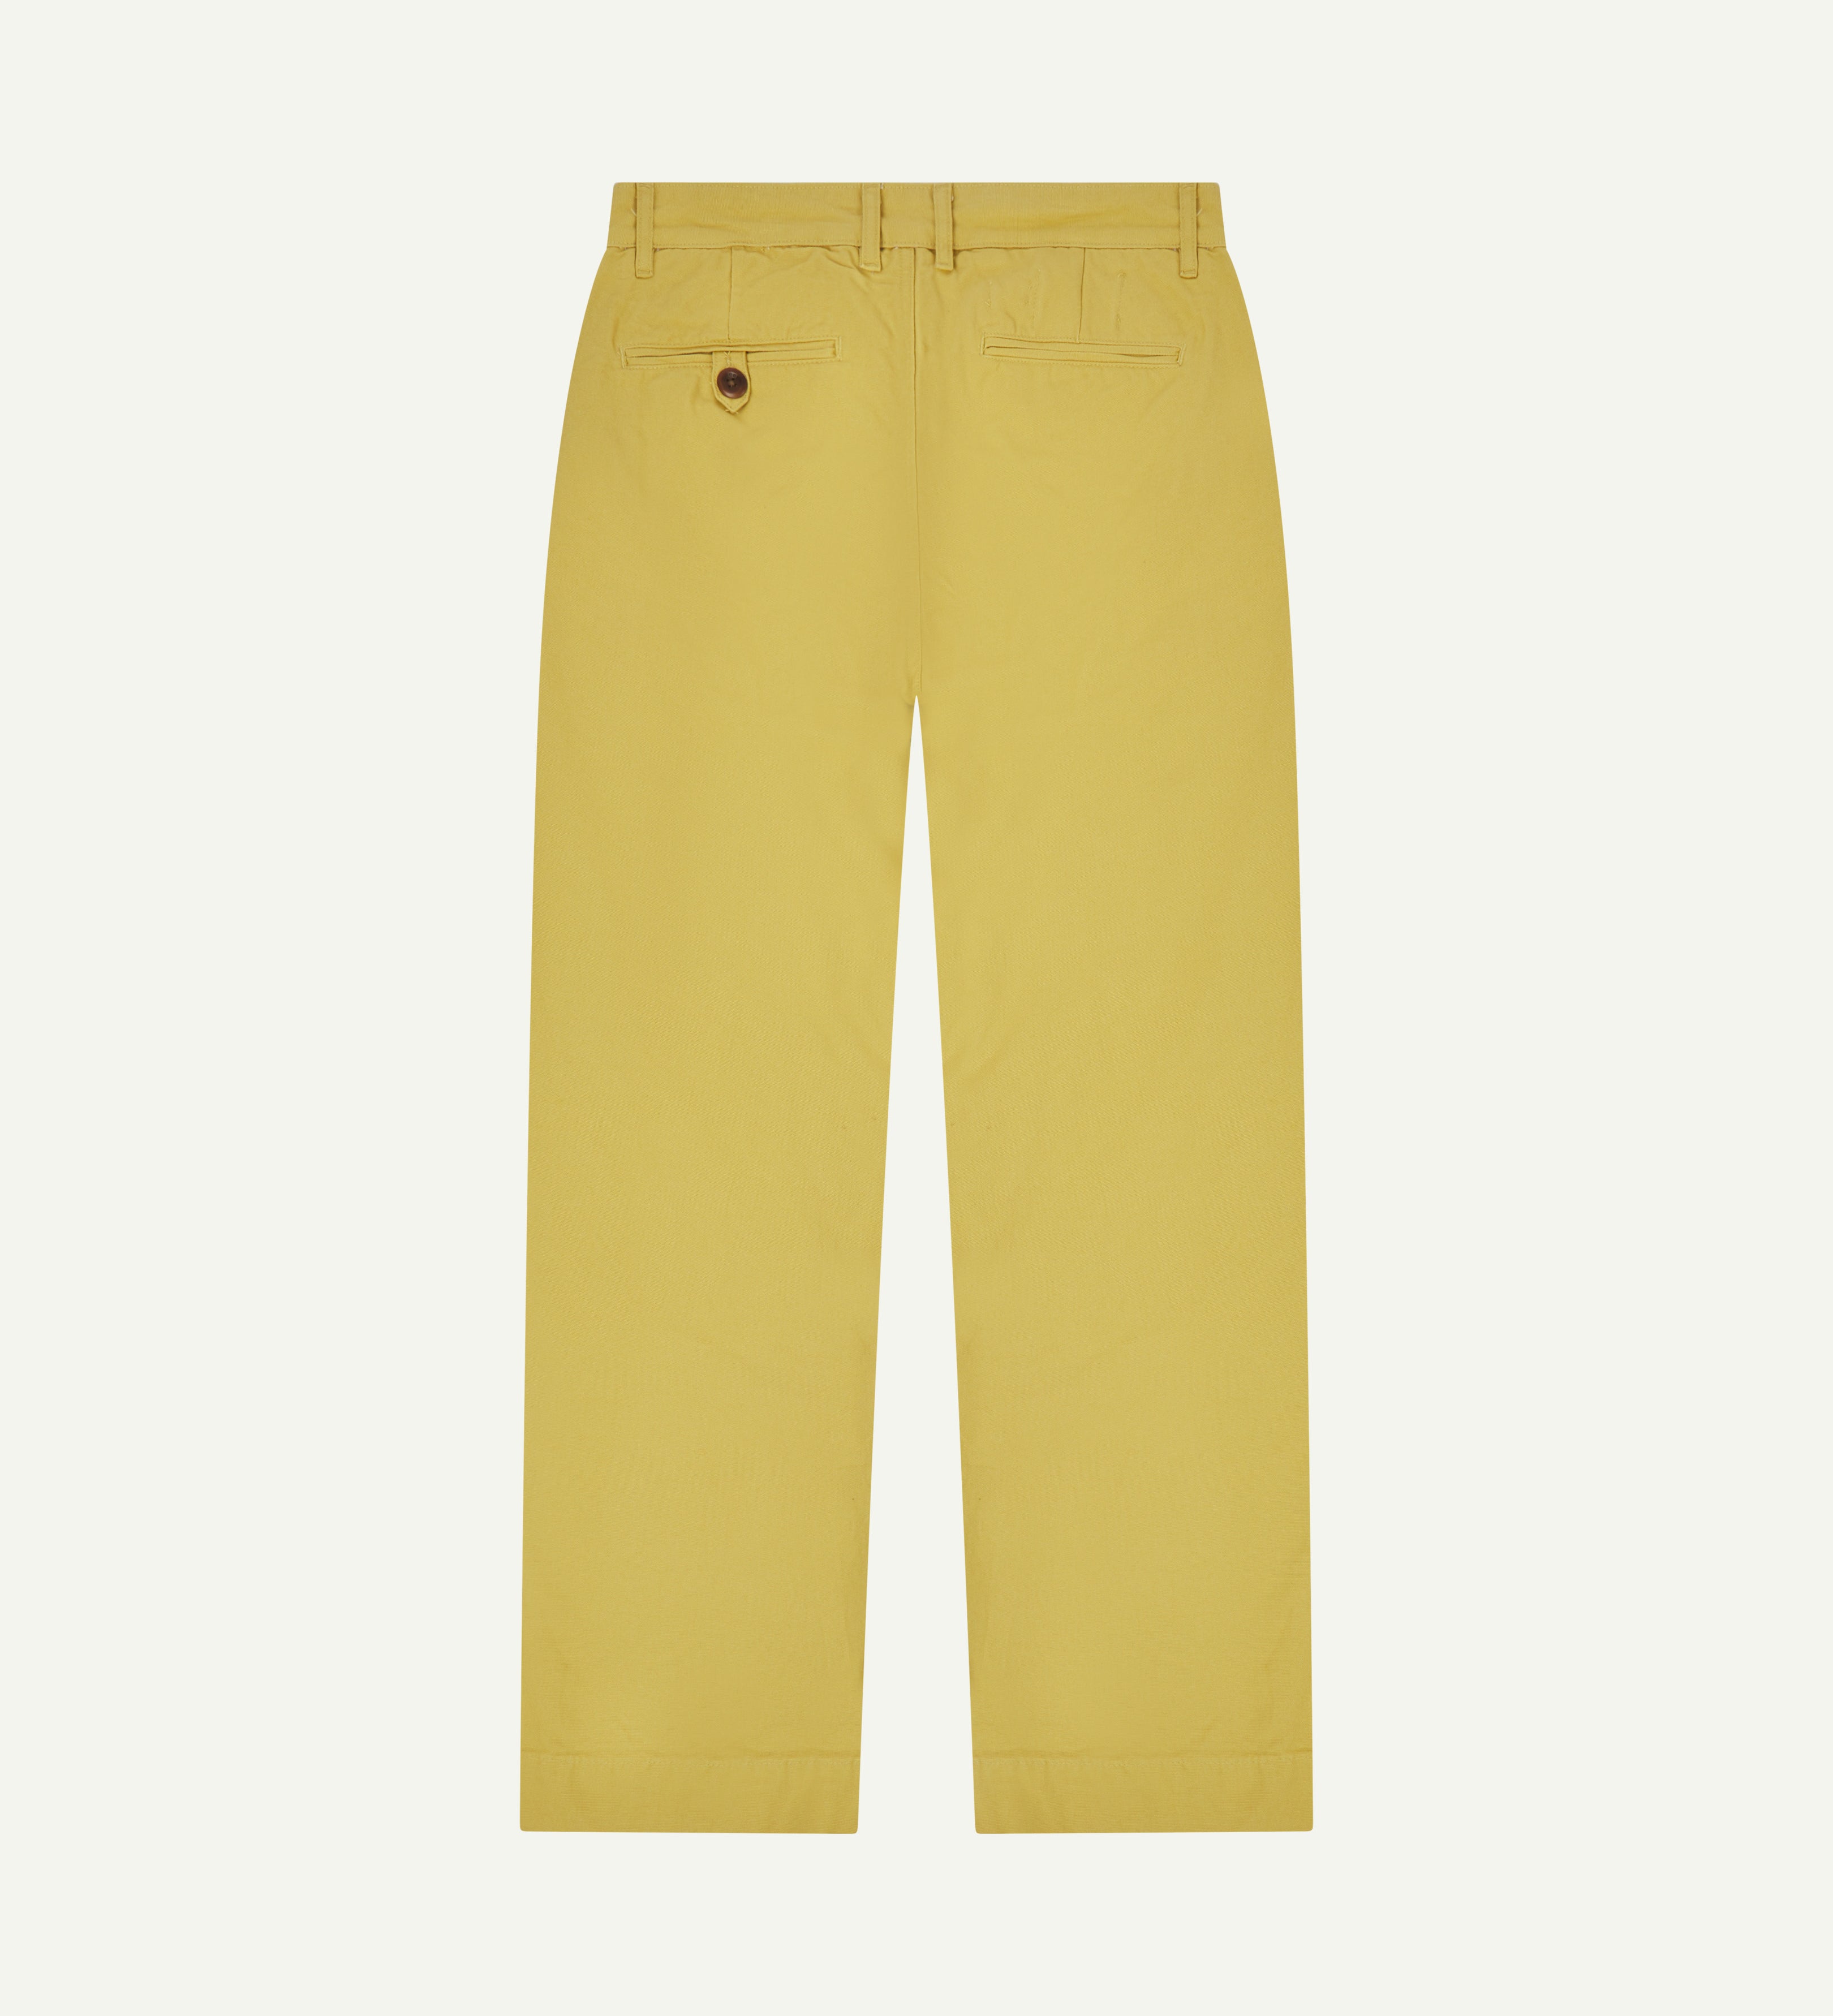 Back view of #5018 Uskees men's organic mid-weight cotton boat trousers in yellow showing wide leg style and buttoned back pocket